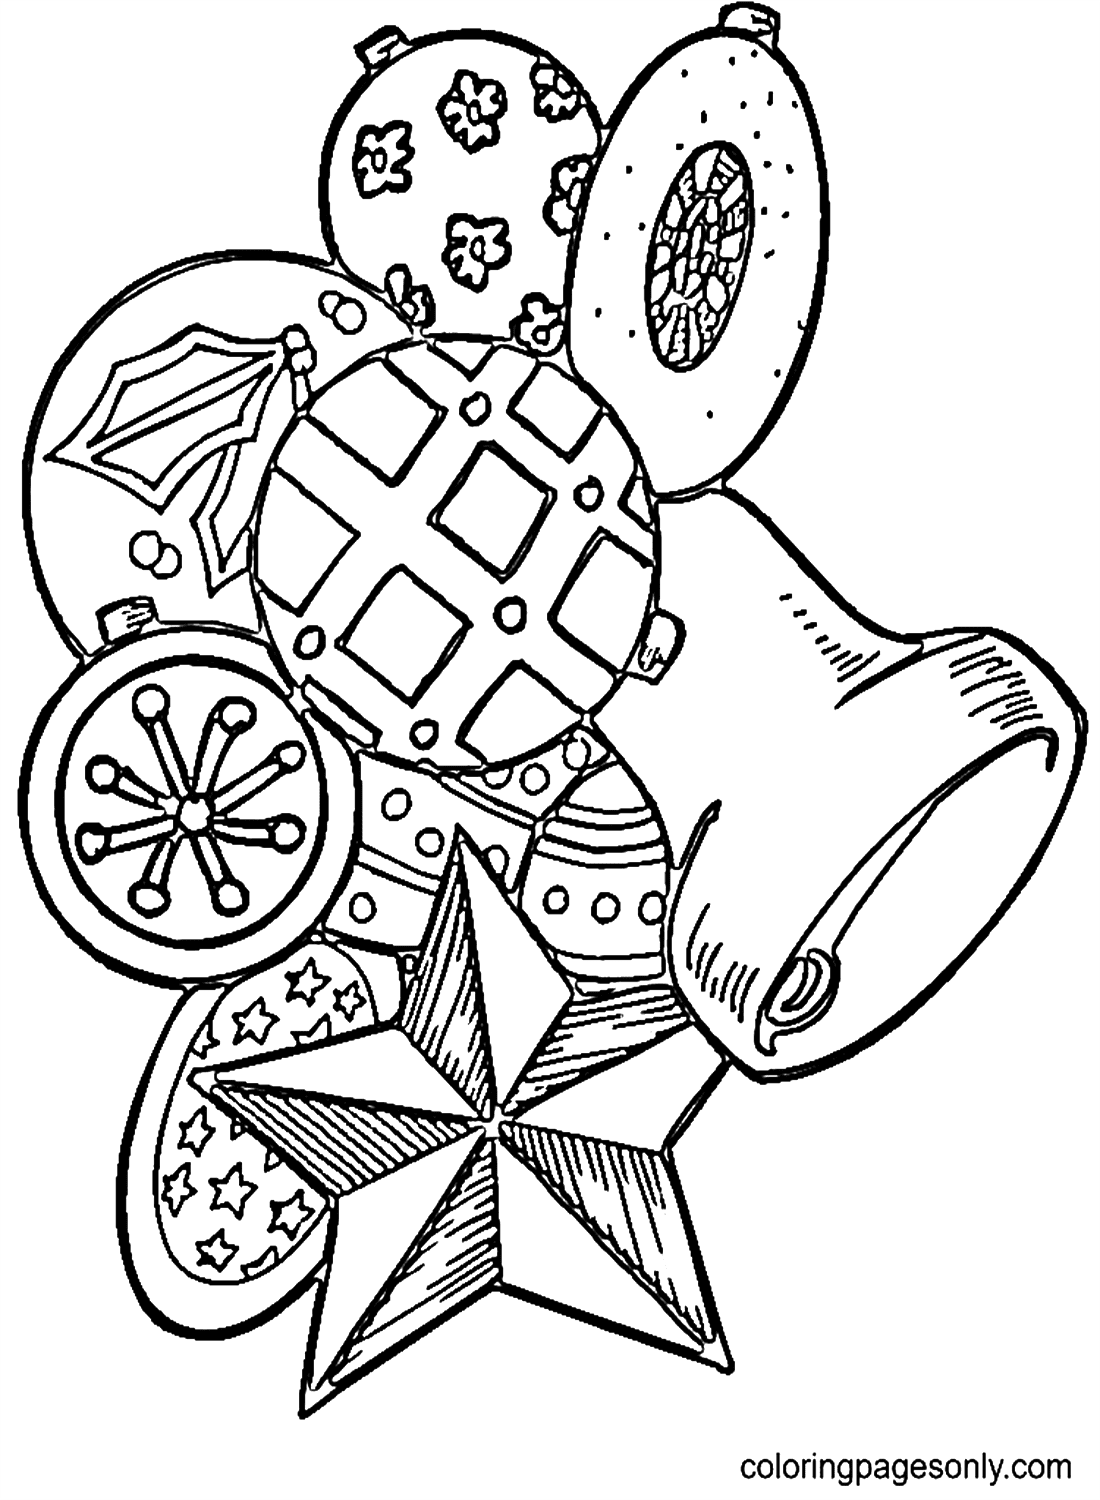 Toys For Christmas Coloring Page